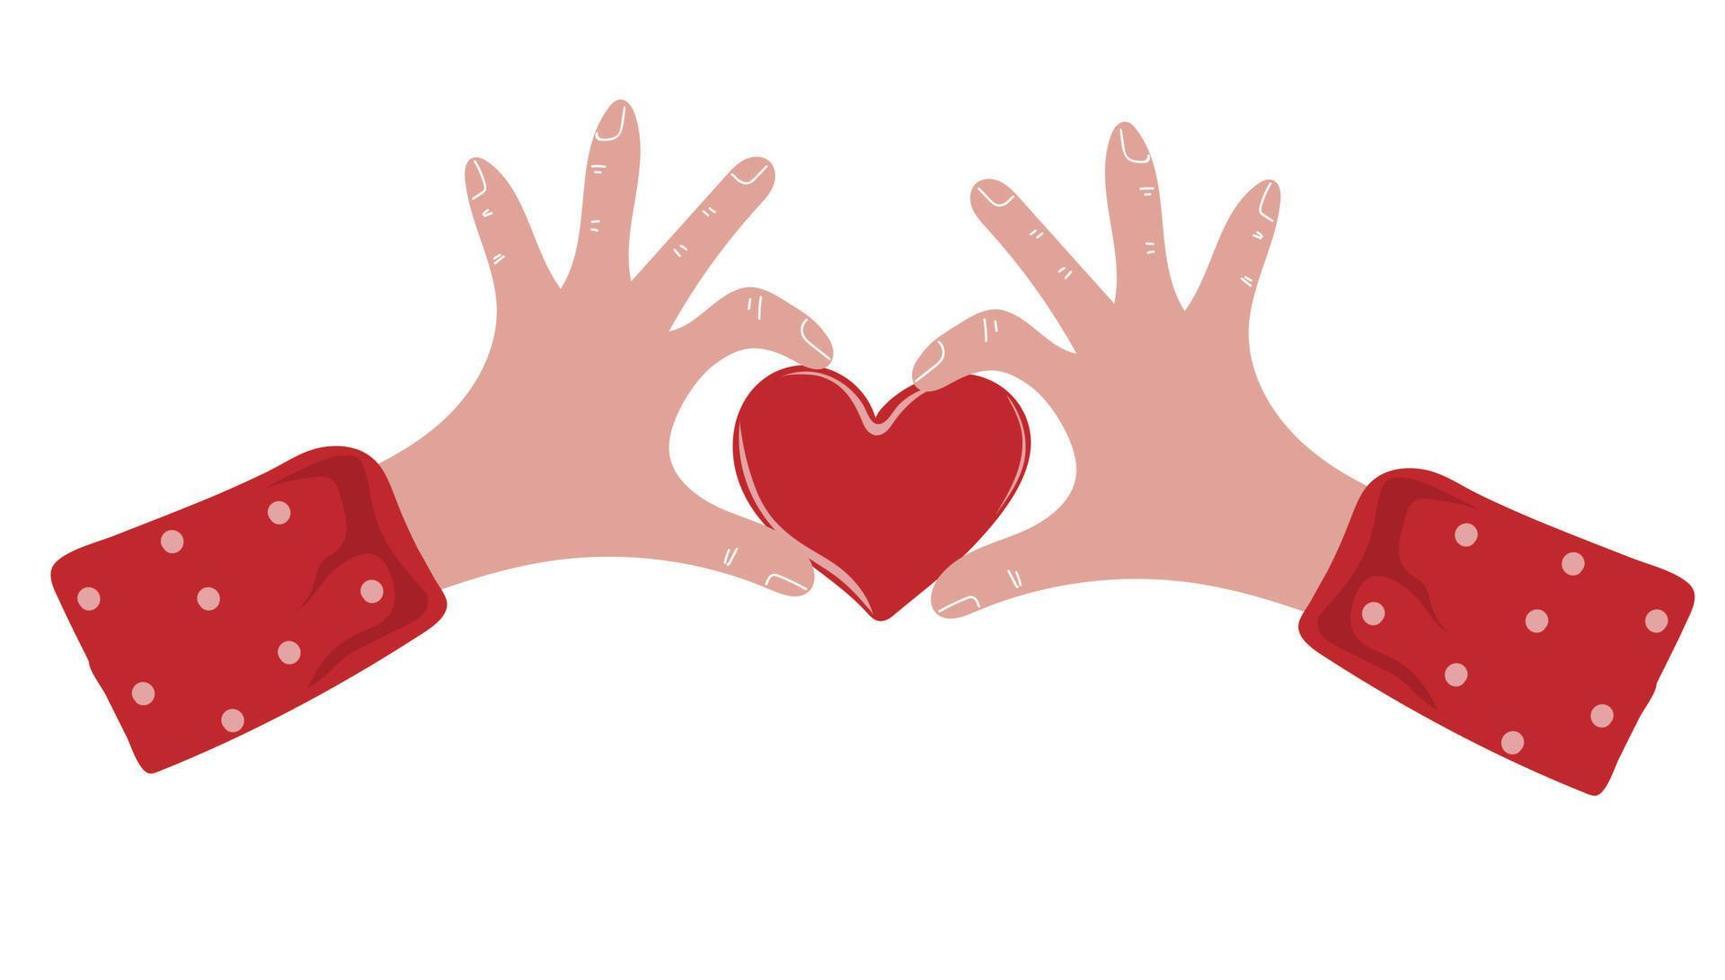 Hand drawn human hands holding heart. Valentines day or charity concept vector